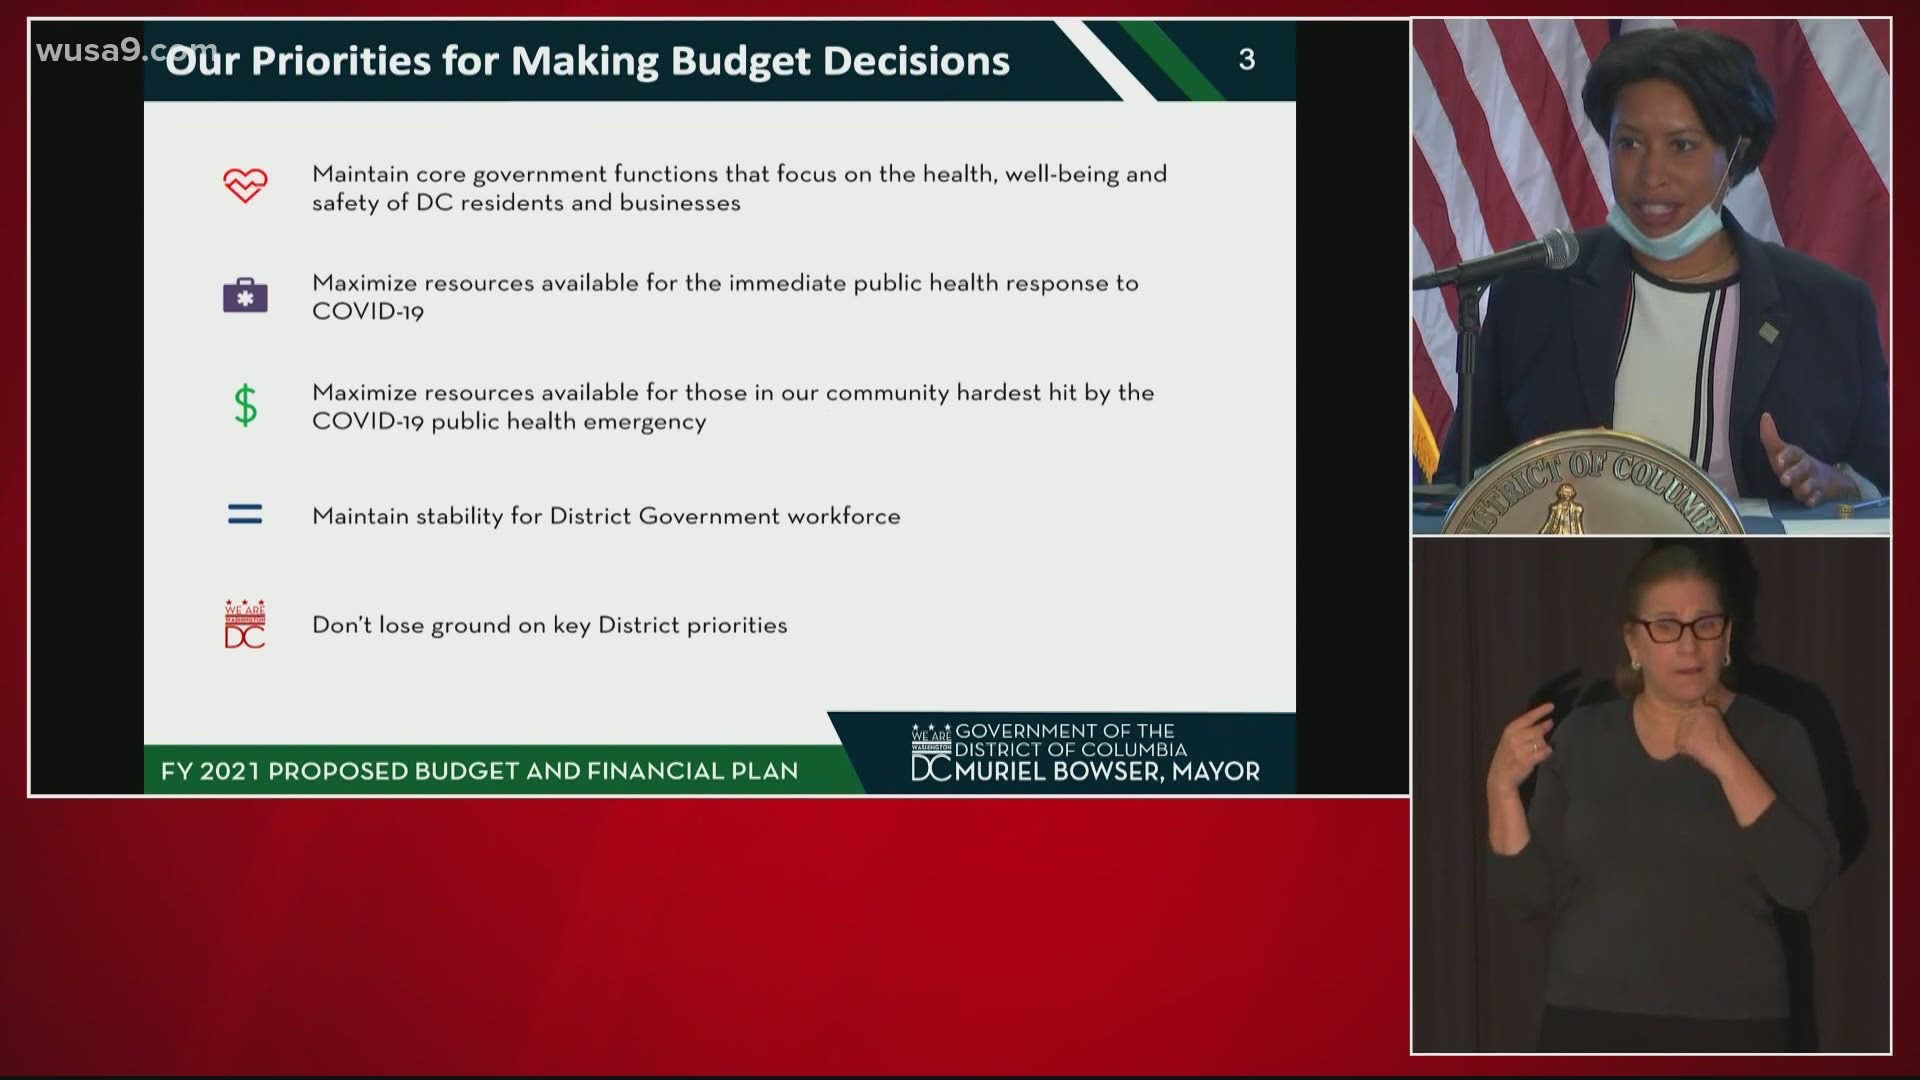 As the city looks forward during the pandemic, D.C. Mayor Muriel Bowser presented her Fiscal Year 2021 budget proposal to the city council on Monday.